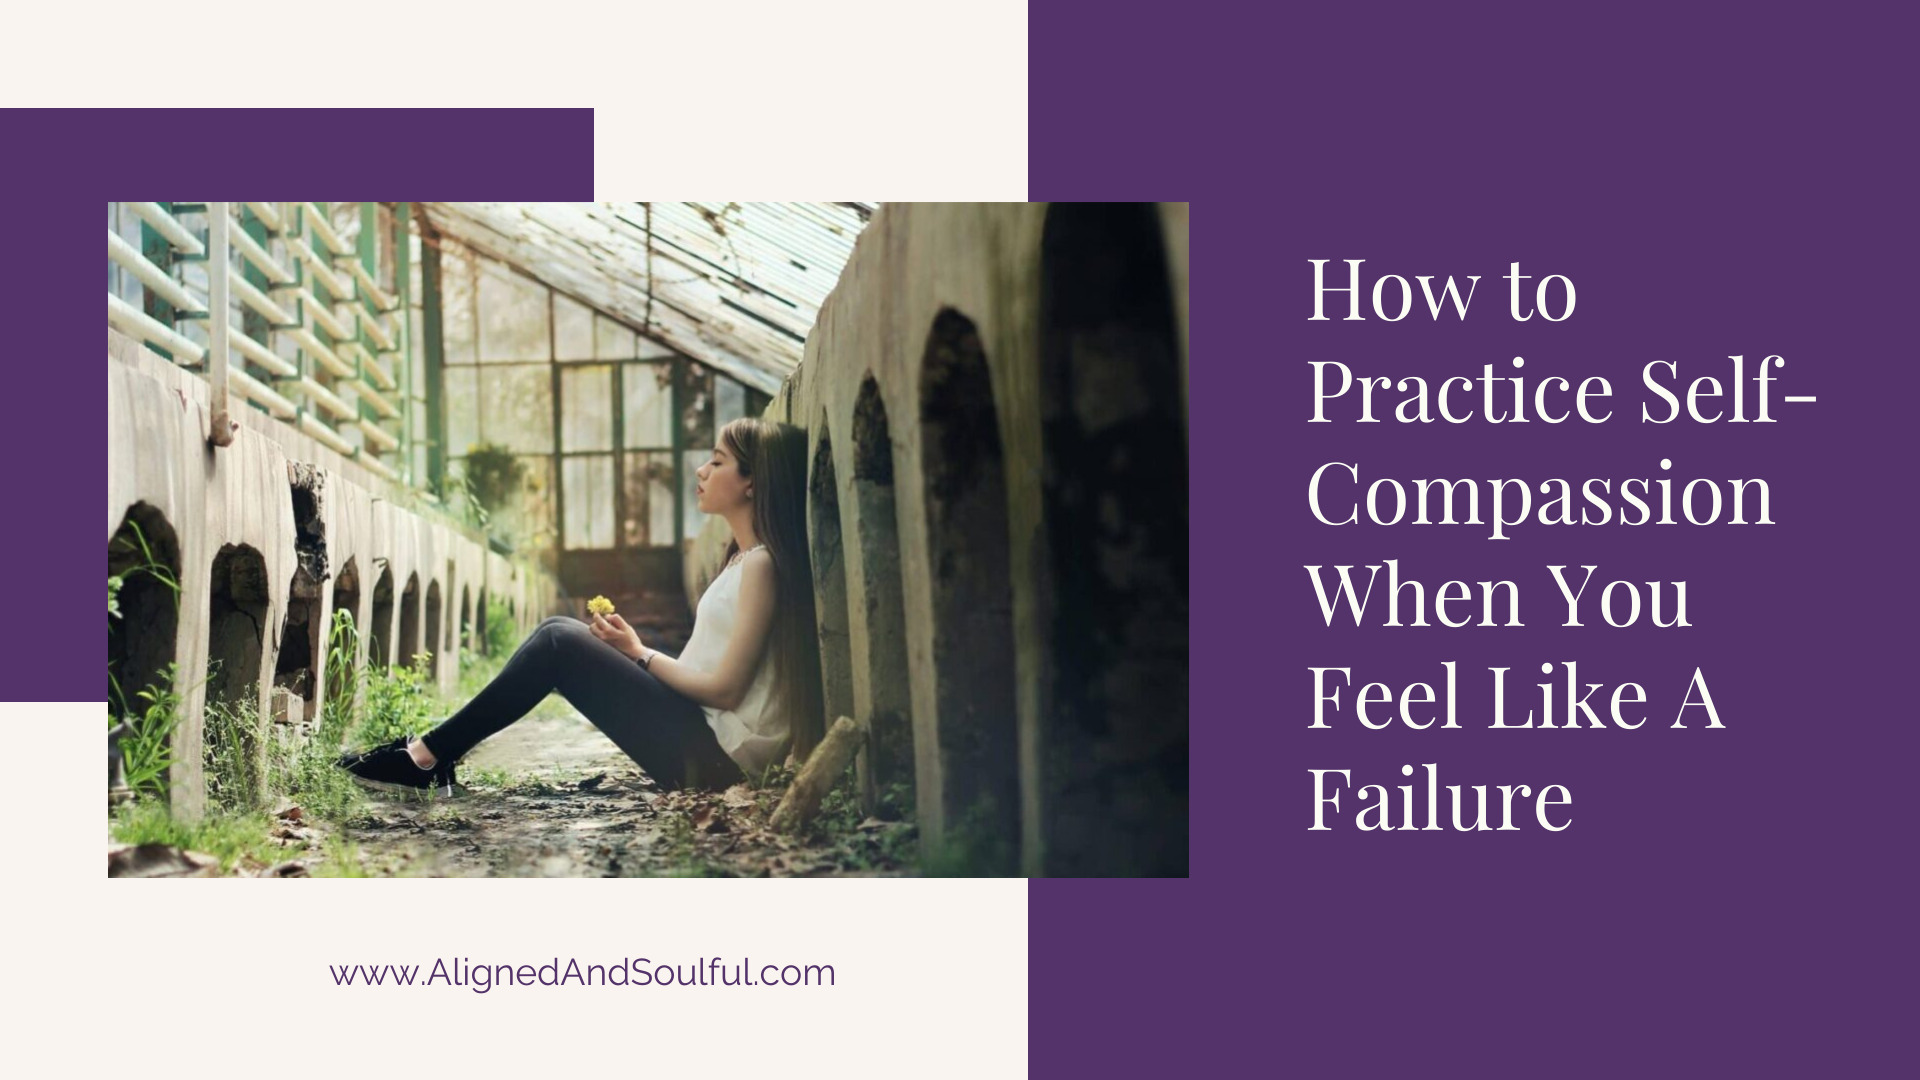 How To Practice Self-Compassion When You Feel Like a Failure